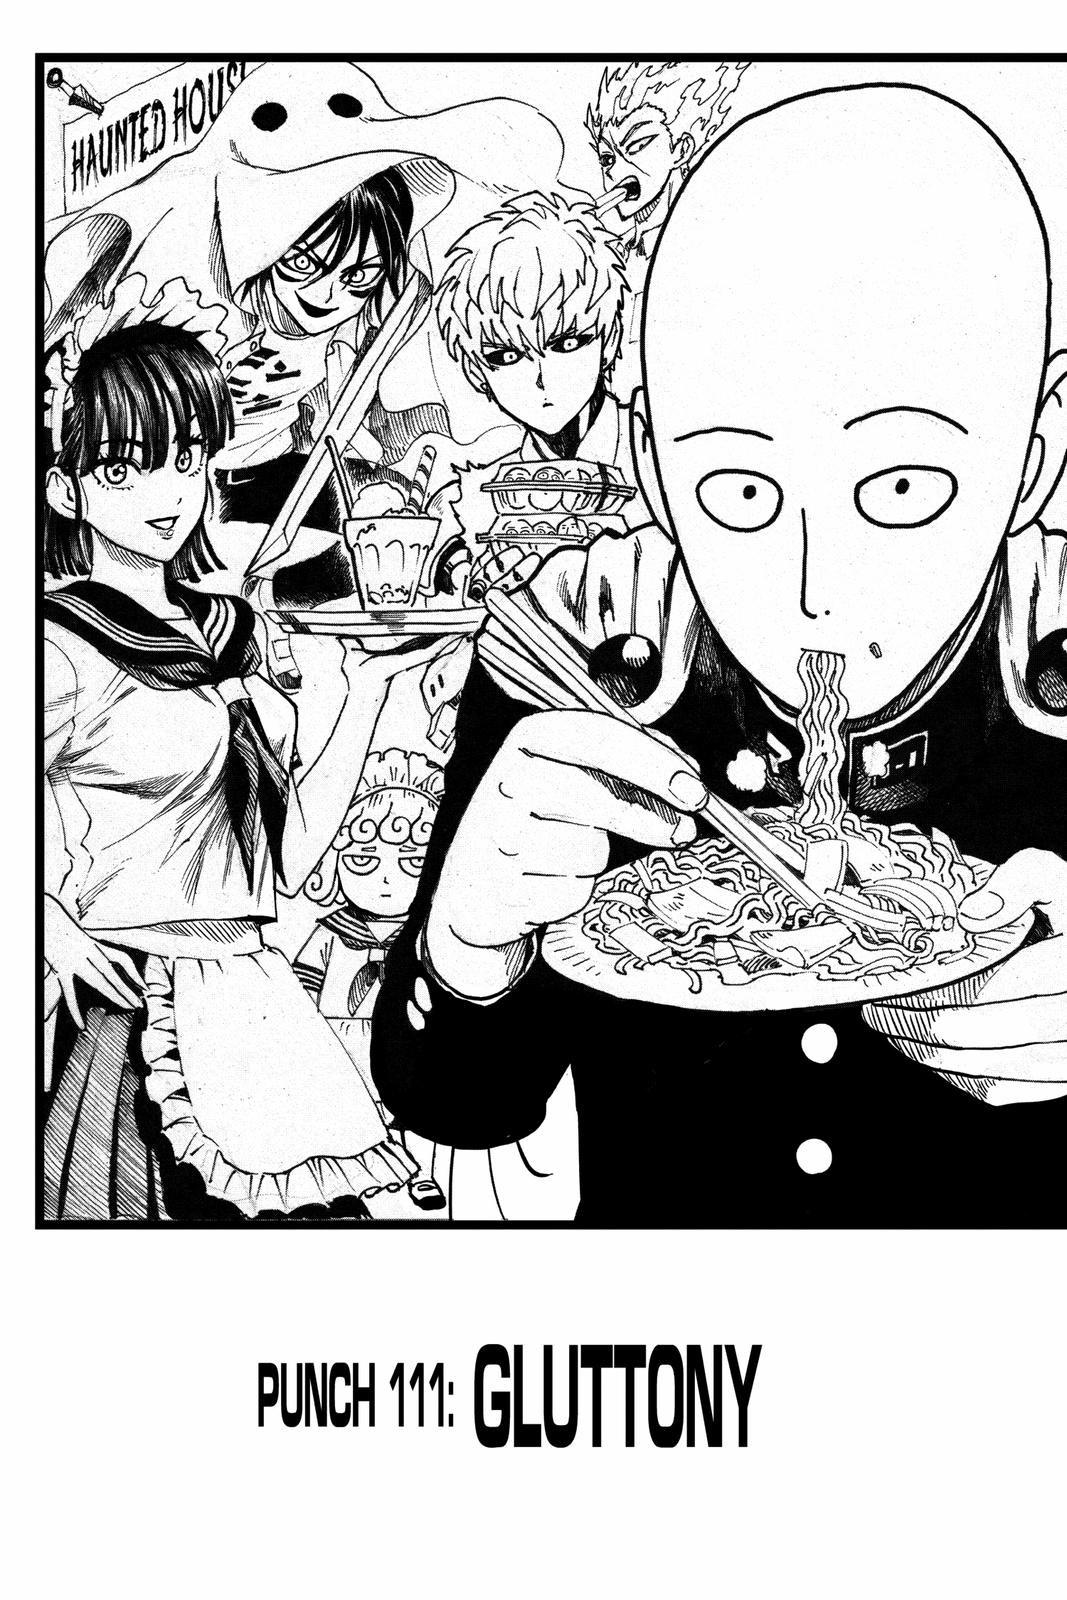 One-Punch Man, Punch 111 image 01